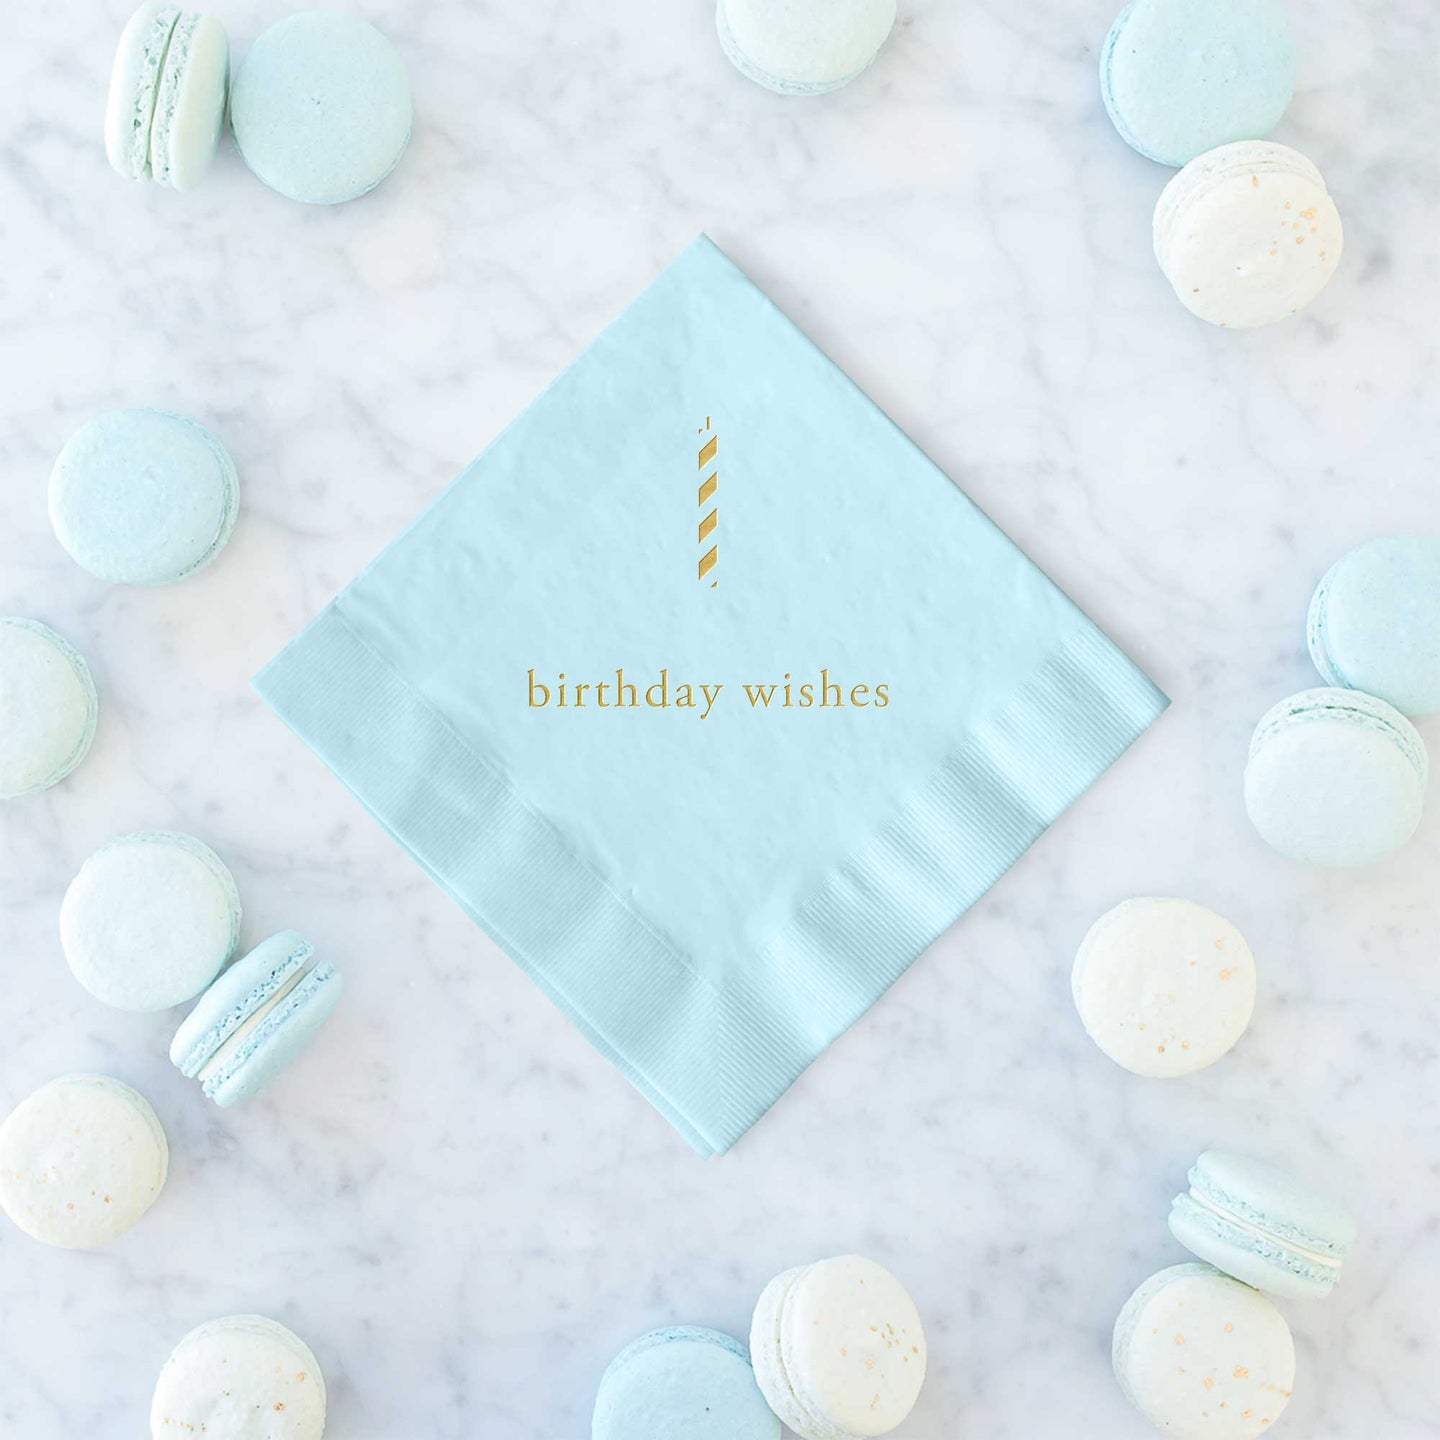 Birthday Wishes Napkins  - Set of 25 - Tea and Becky